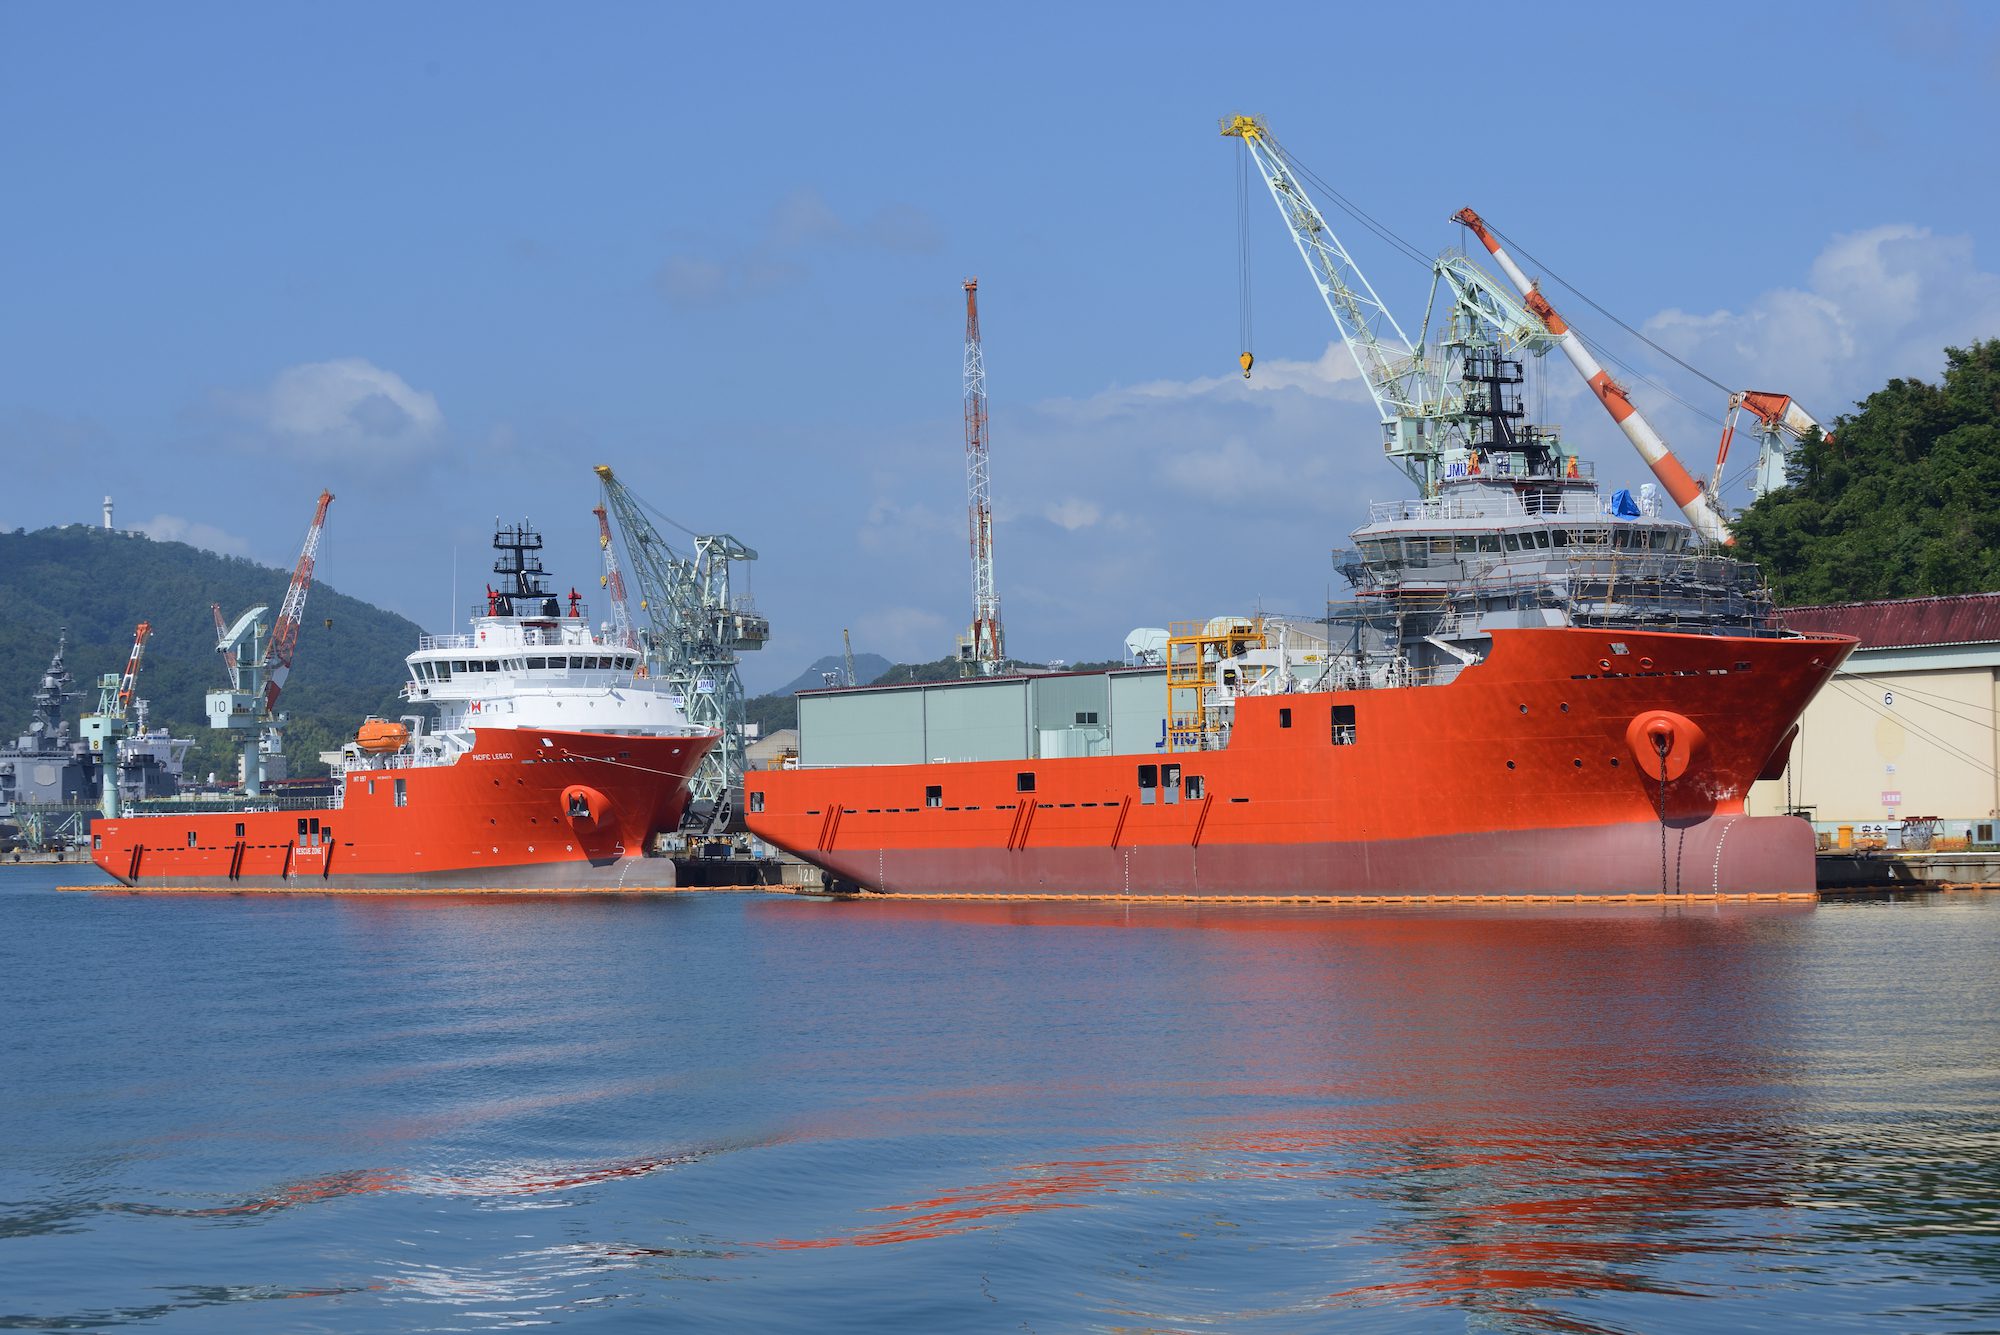 Tidewater Acquires Swire Pacific Offshore, Creating World’s Leading OSV Company